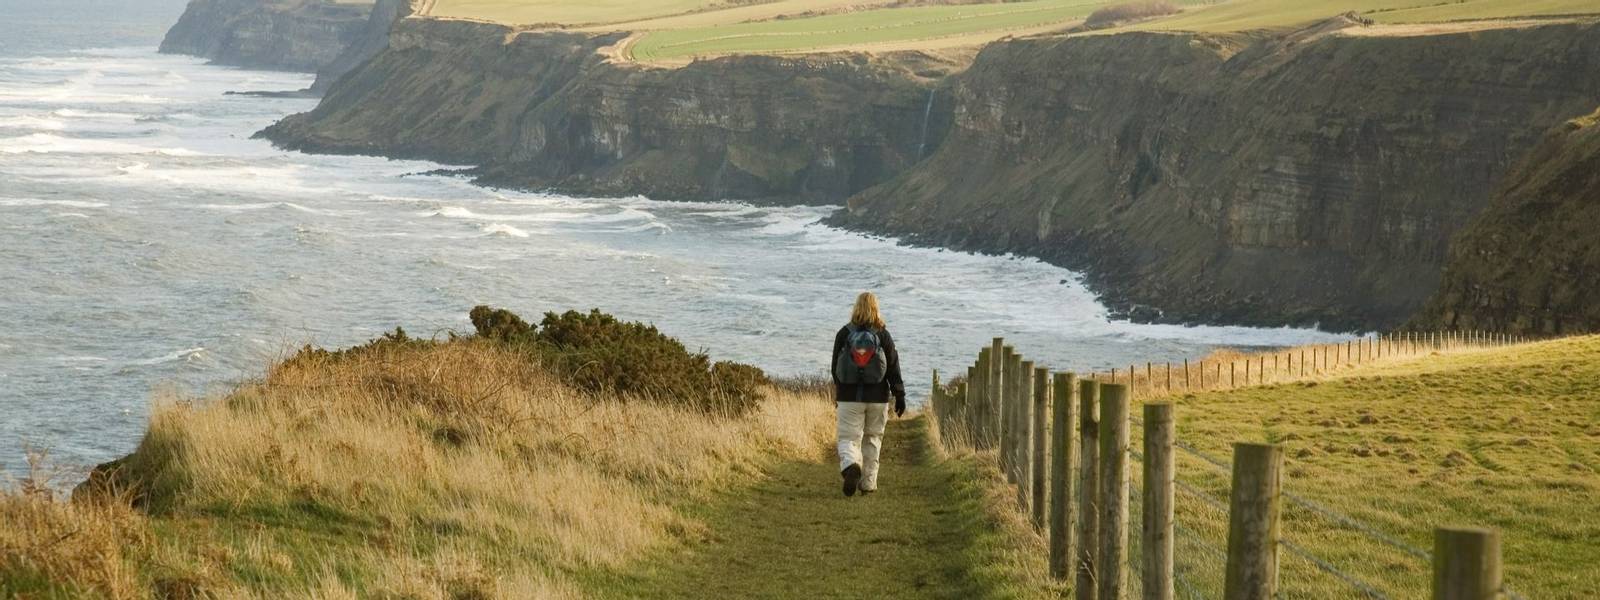 Walker on the coastal path, the Cleveland way in North Yorkshire, England, UK.